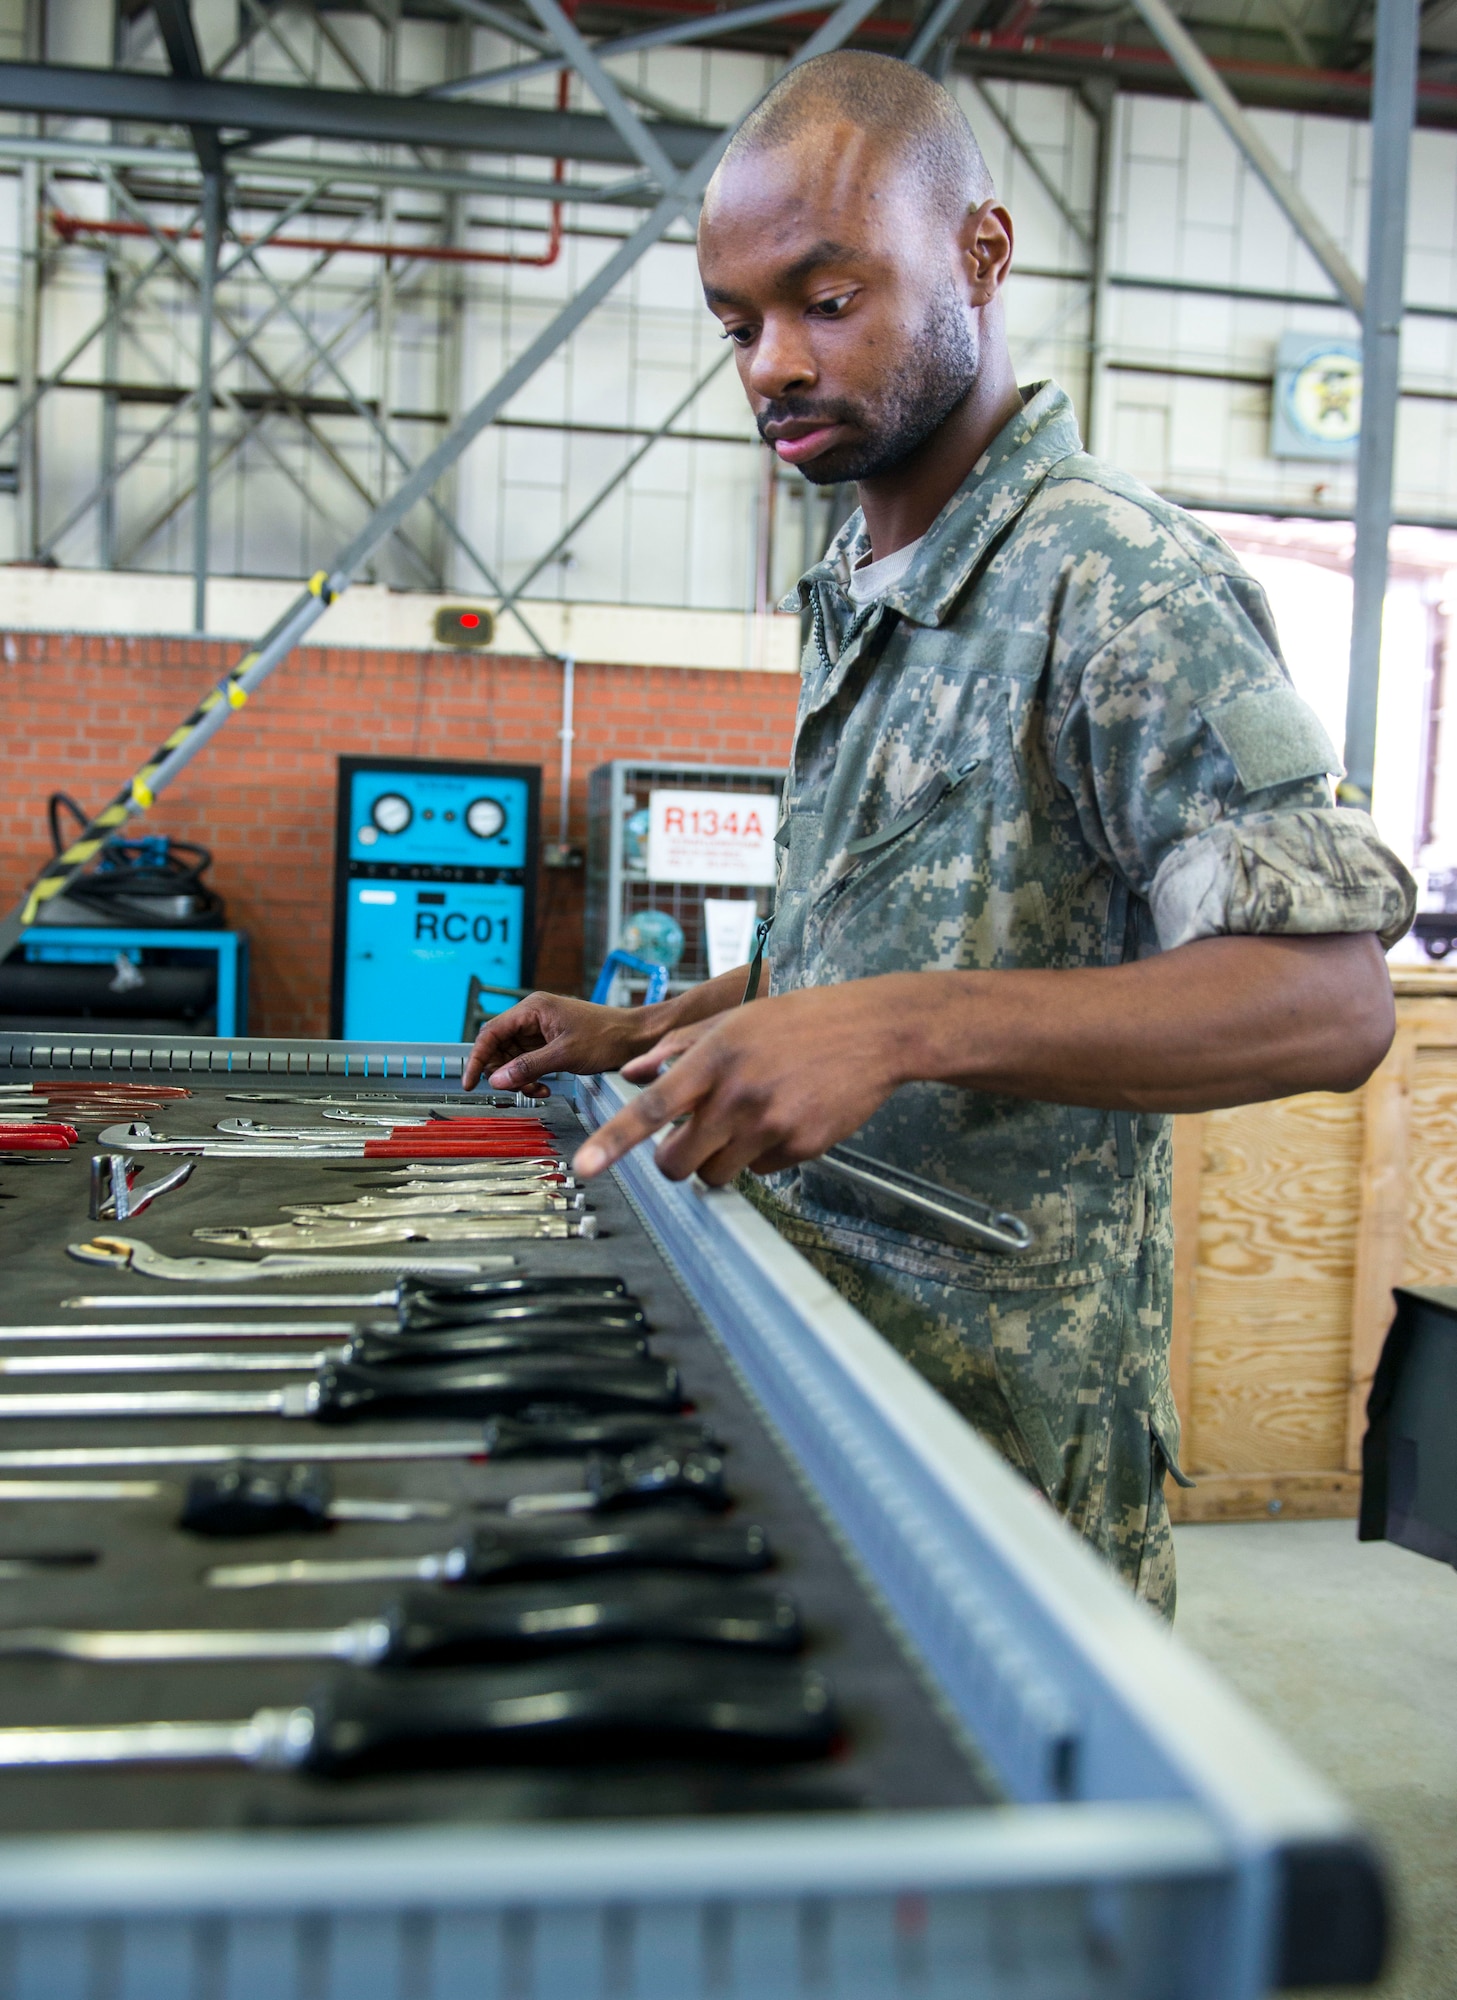 U.S. Air Force Senior Airman Lamar Cotton, 100th Maintenance Squadron aerospace ground equipment journeyman, looks for his next tool while working on a diesel generator at RAF Mildenhall, England, May 8, 2018. Aerospace ground equipment Airmen maintain a variety of essential equipment such as generators, heaters and flood lights, which are essential for crew chiefs and other flightline Airmen to do their jobs and keep the mission going. (U.S. Air Force photo by Airman 1st Class Alexandria Lee)